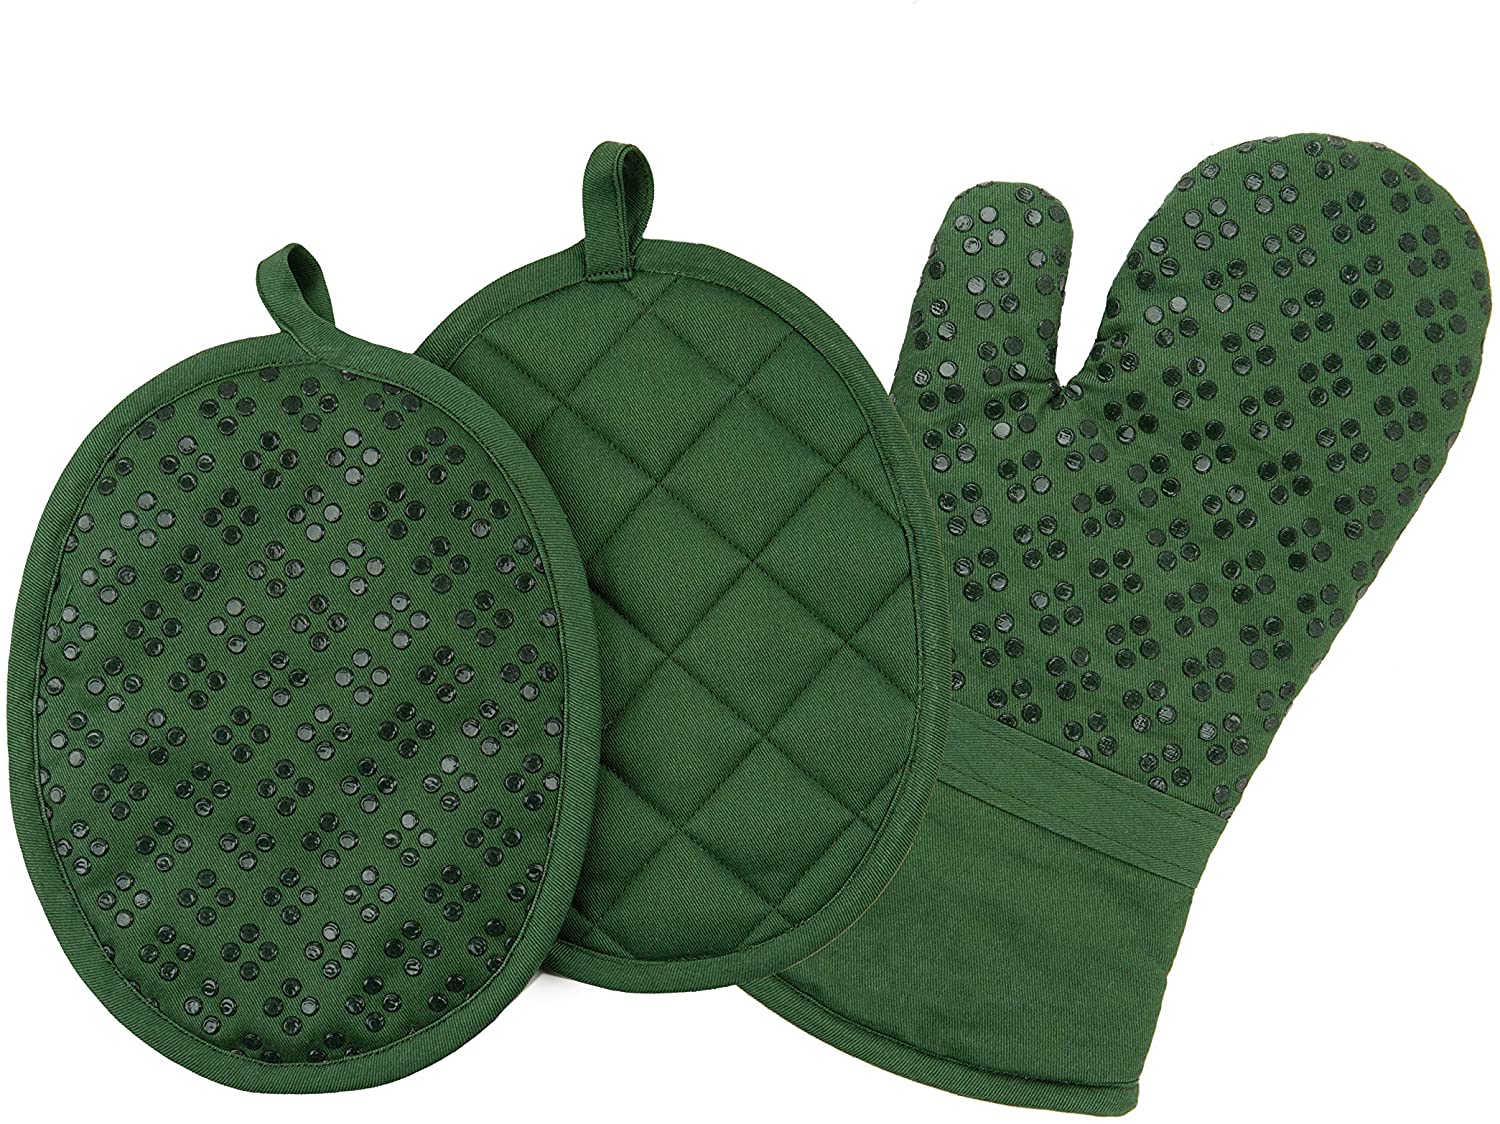 FIFIT KITCHEN 13 Pcs Set Oven Mitts and Pot Holders, Silicone Oven India